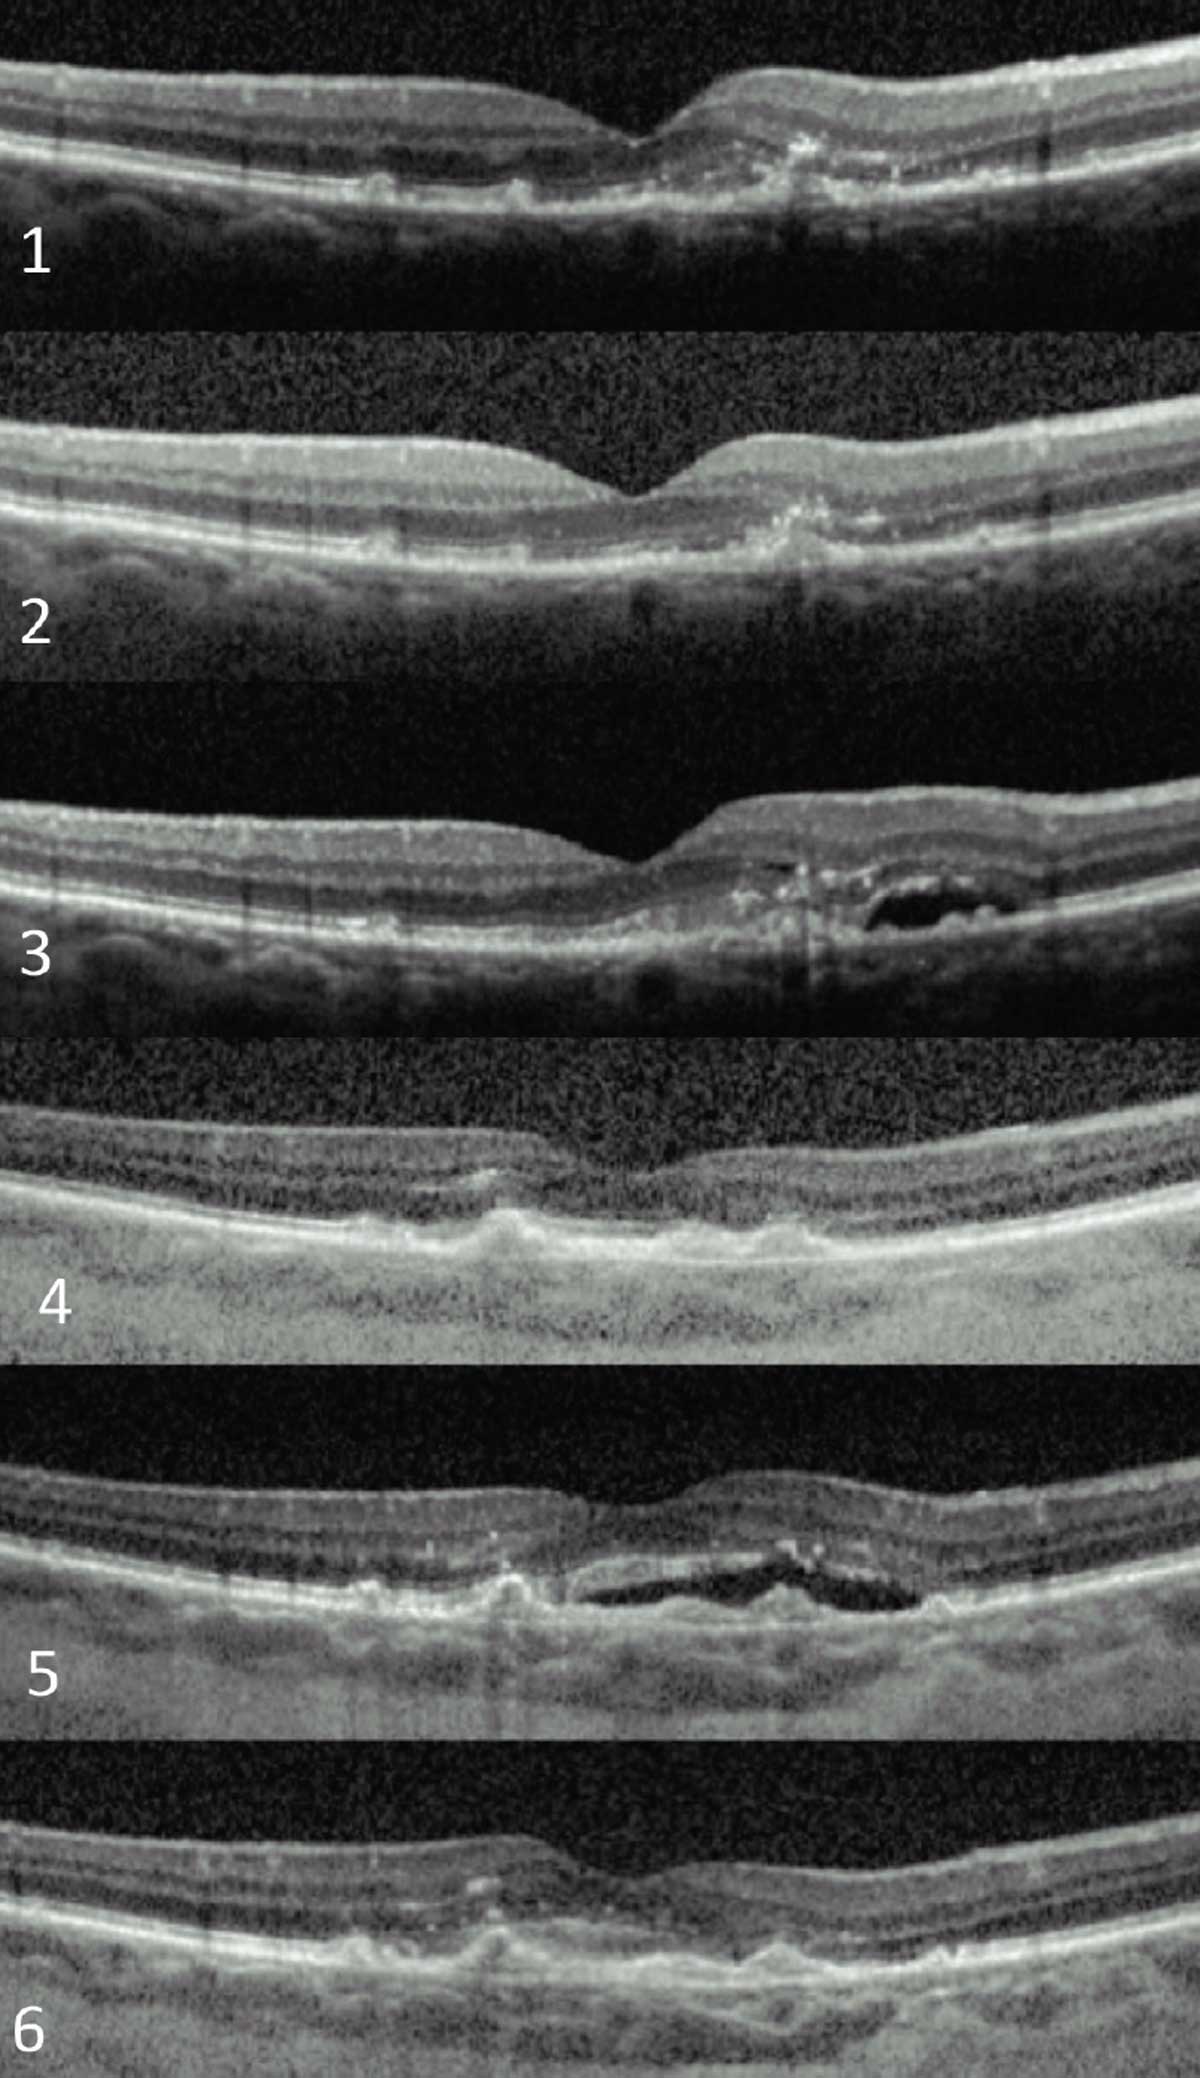 Fig. 3. An exudative AMD patient who has required over 20 anti-VEGF injections in nine years to maintain 20/40 visual acuity. These are a few snapshots in time during the course of her treatment. 